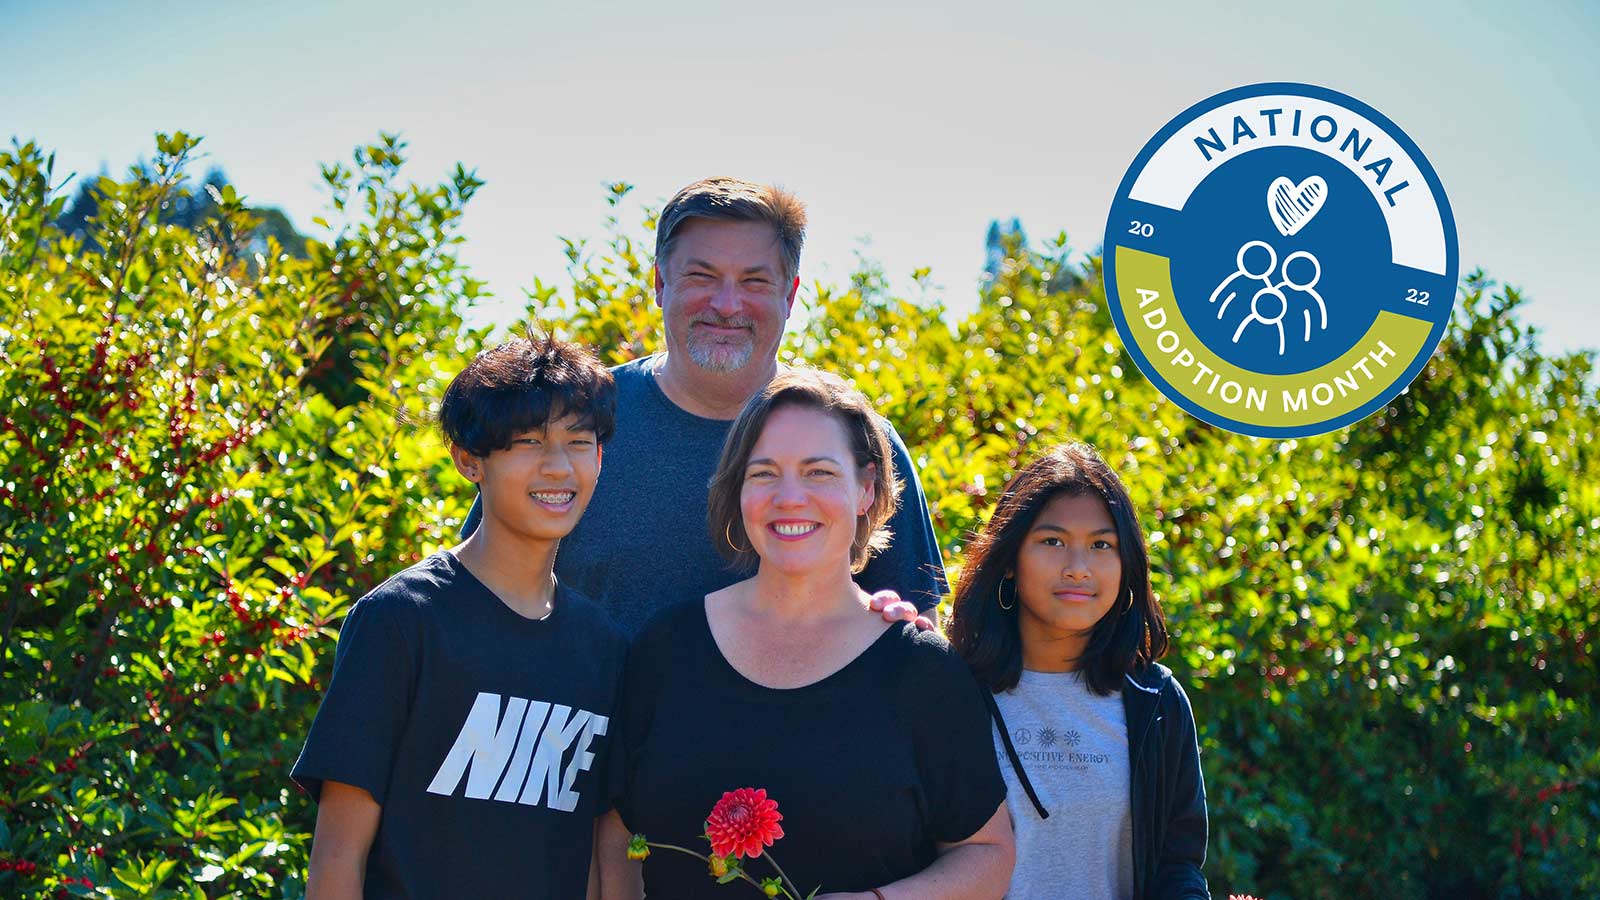 Susie Doig and family with National Adoption Month badge